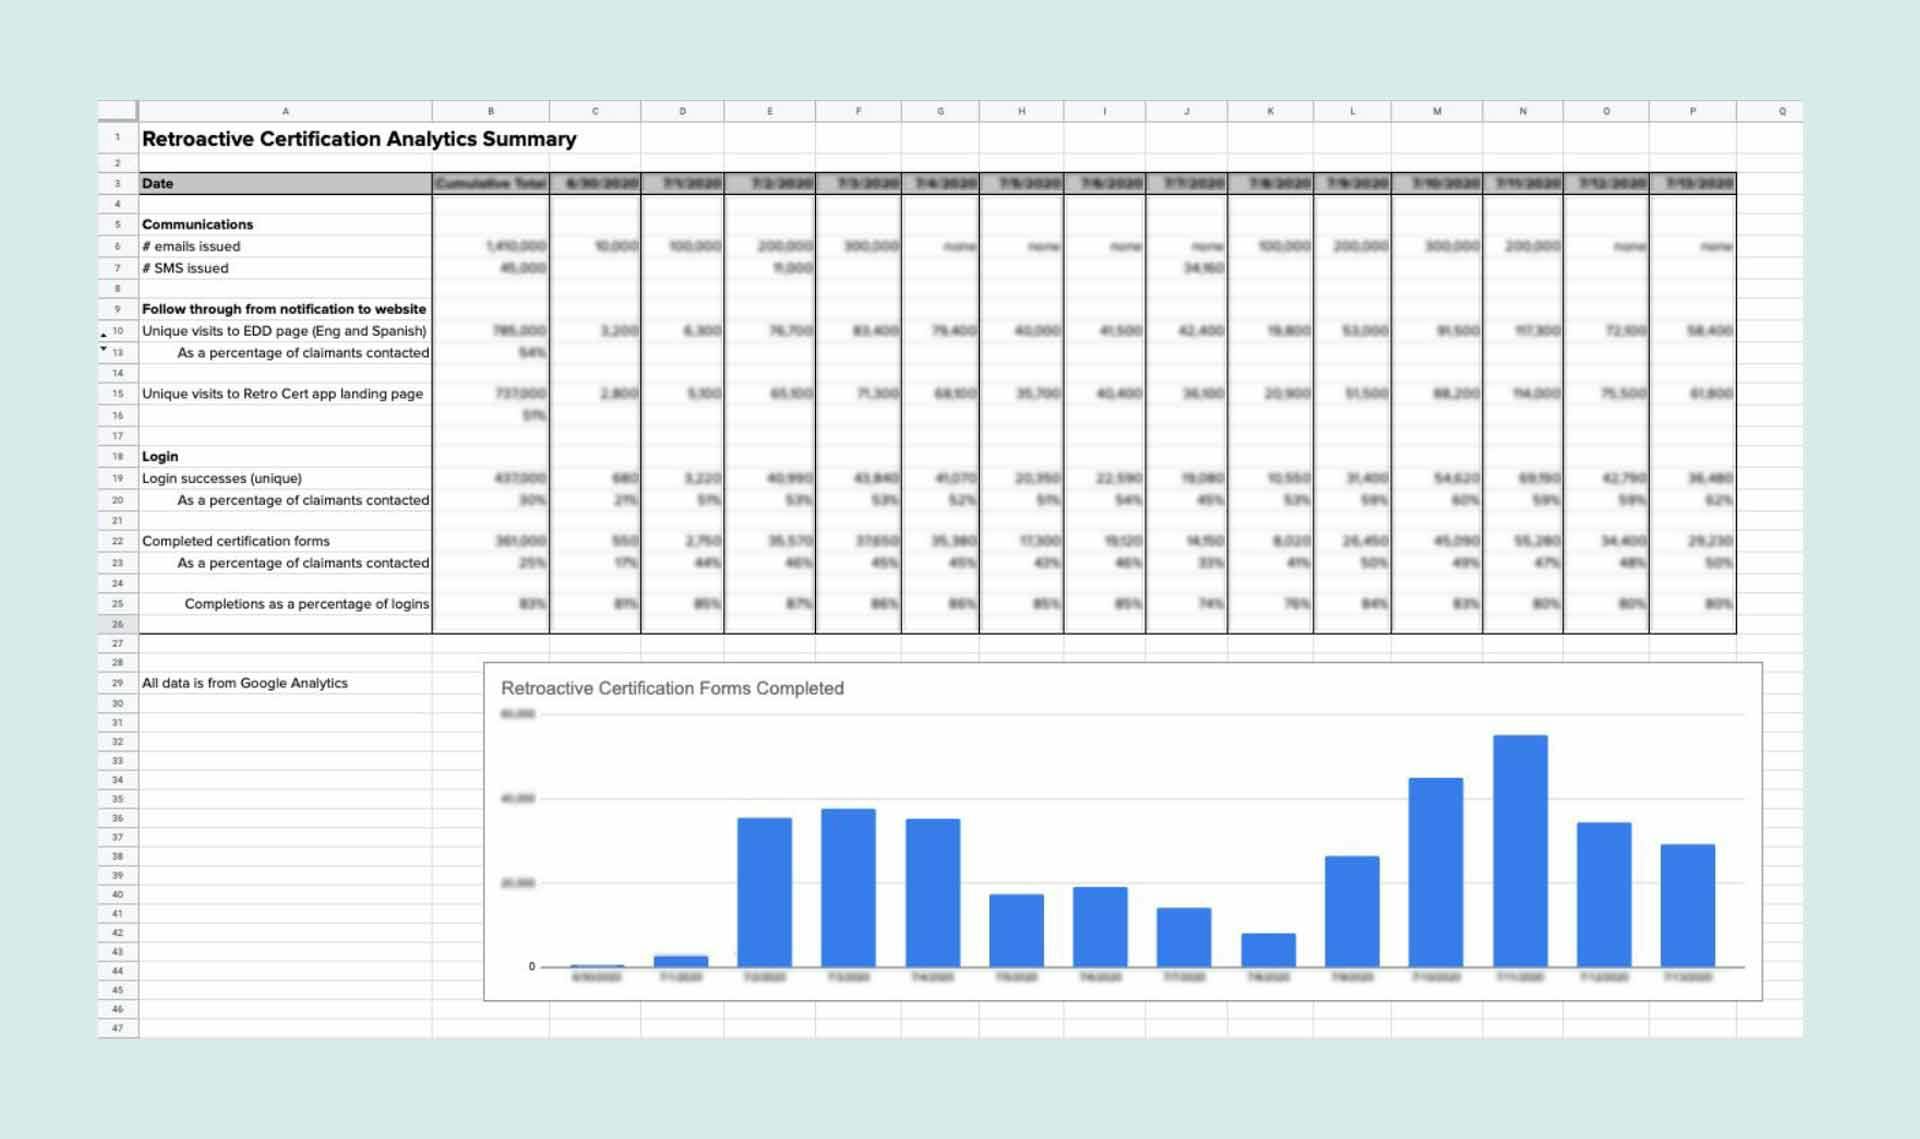 A screenshot showing data gathering and metrics analysis in a scrappy, Google spreadsheet.